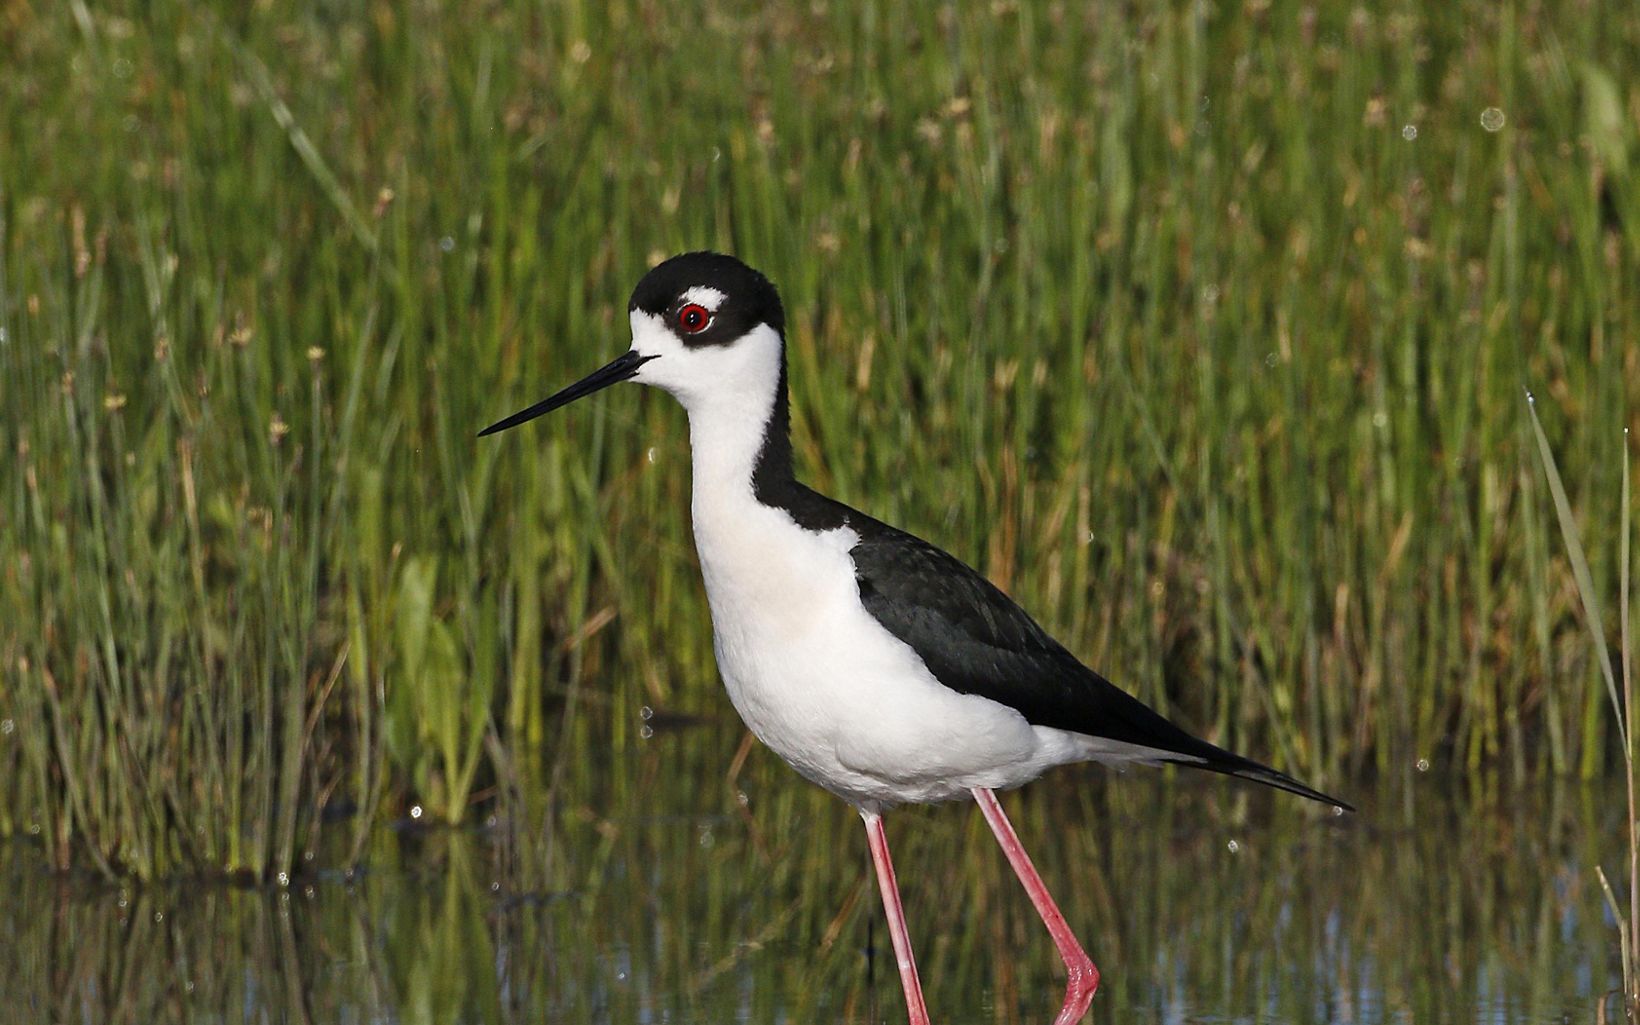 Mid-sized black and white bird with red legs standing in shallow water.